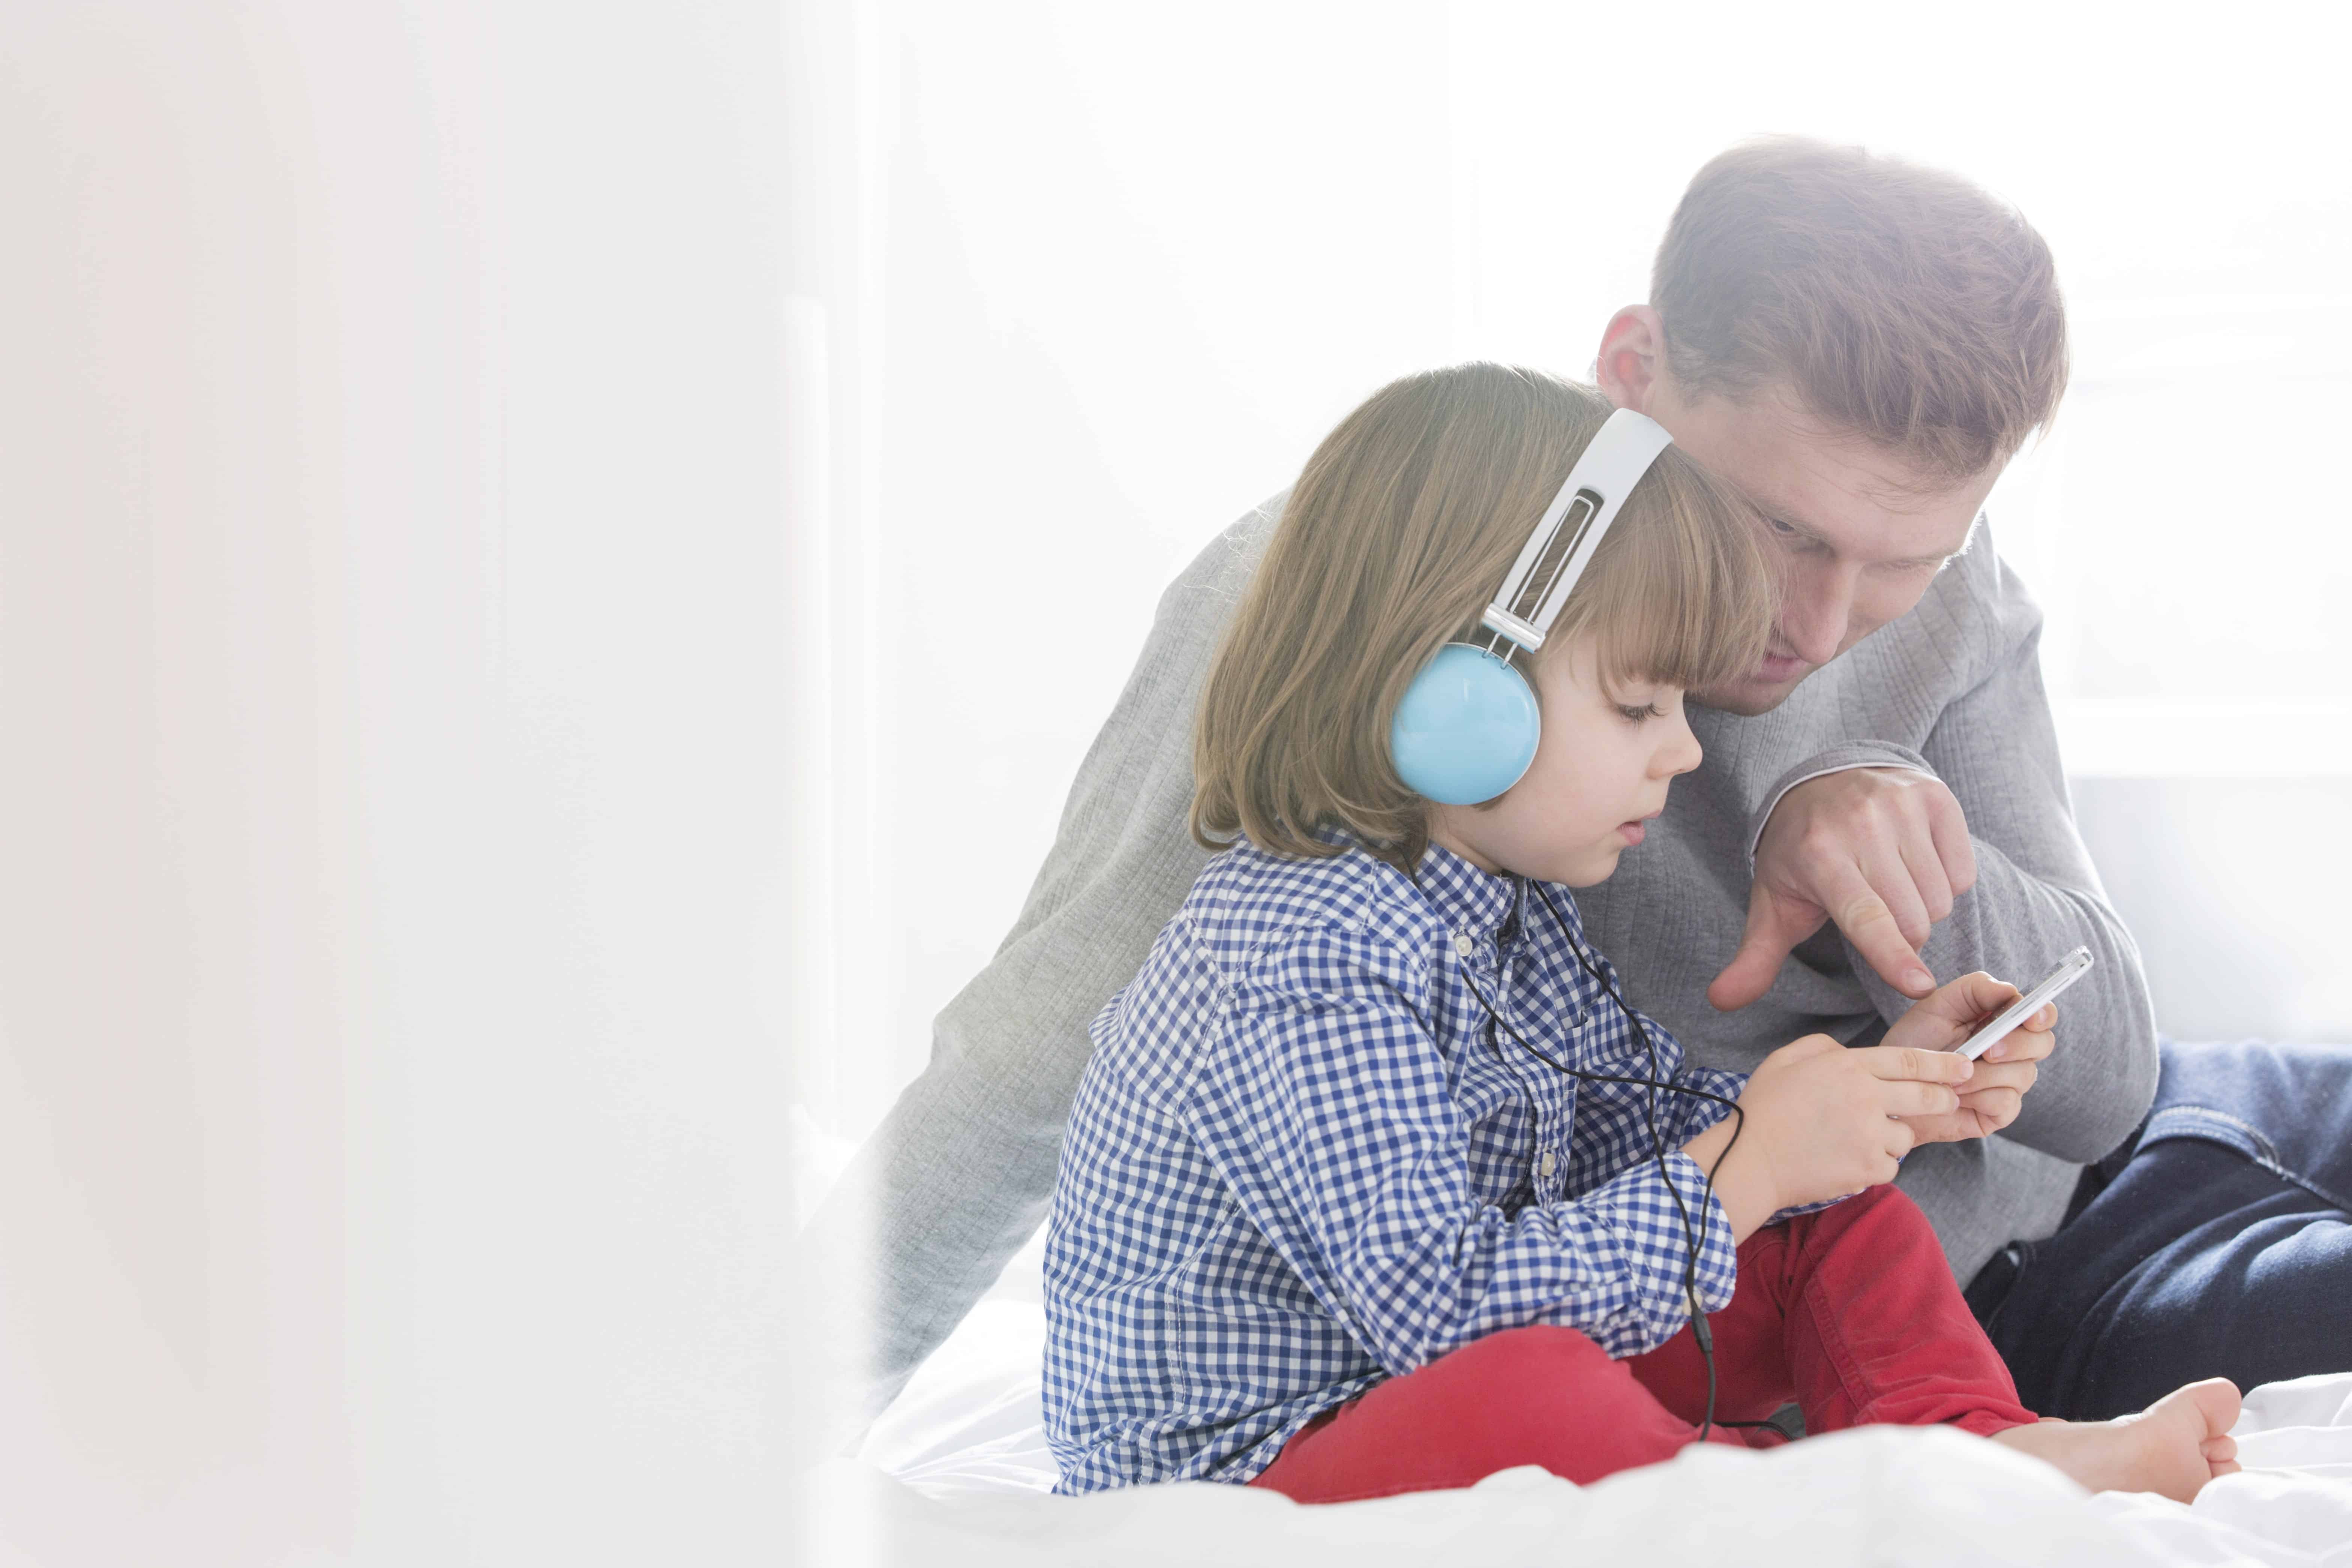 Child with headphones listening to music with father